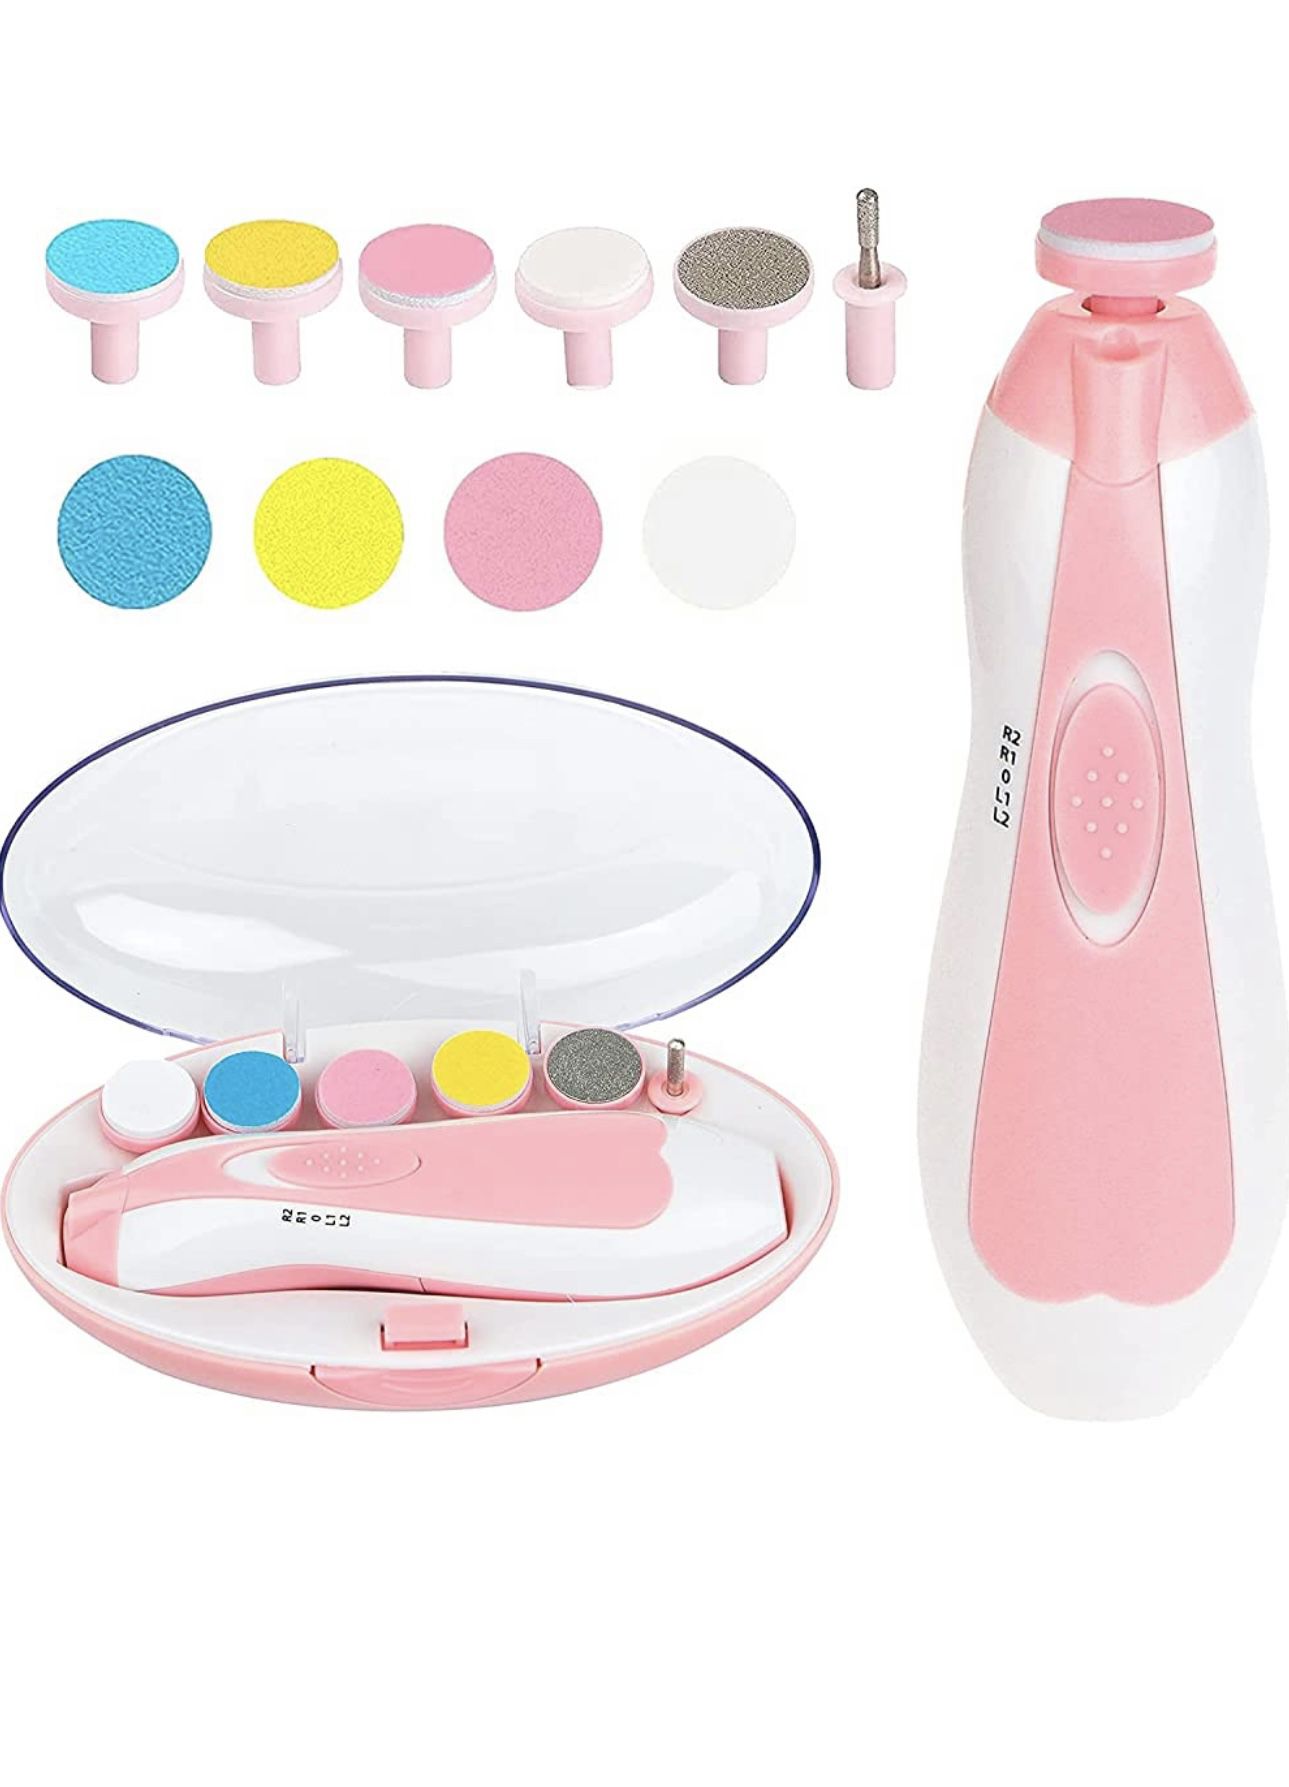 Pampered Baby Electric Nail Trimmer 